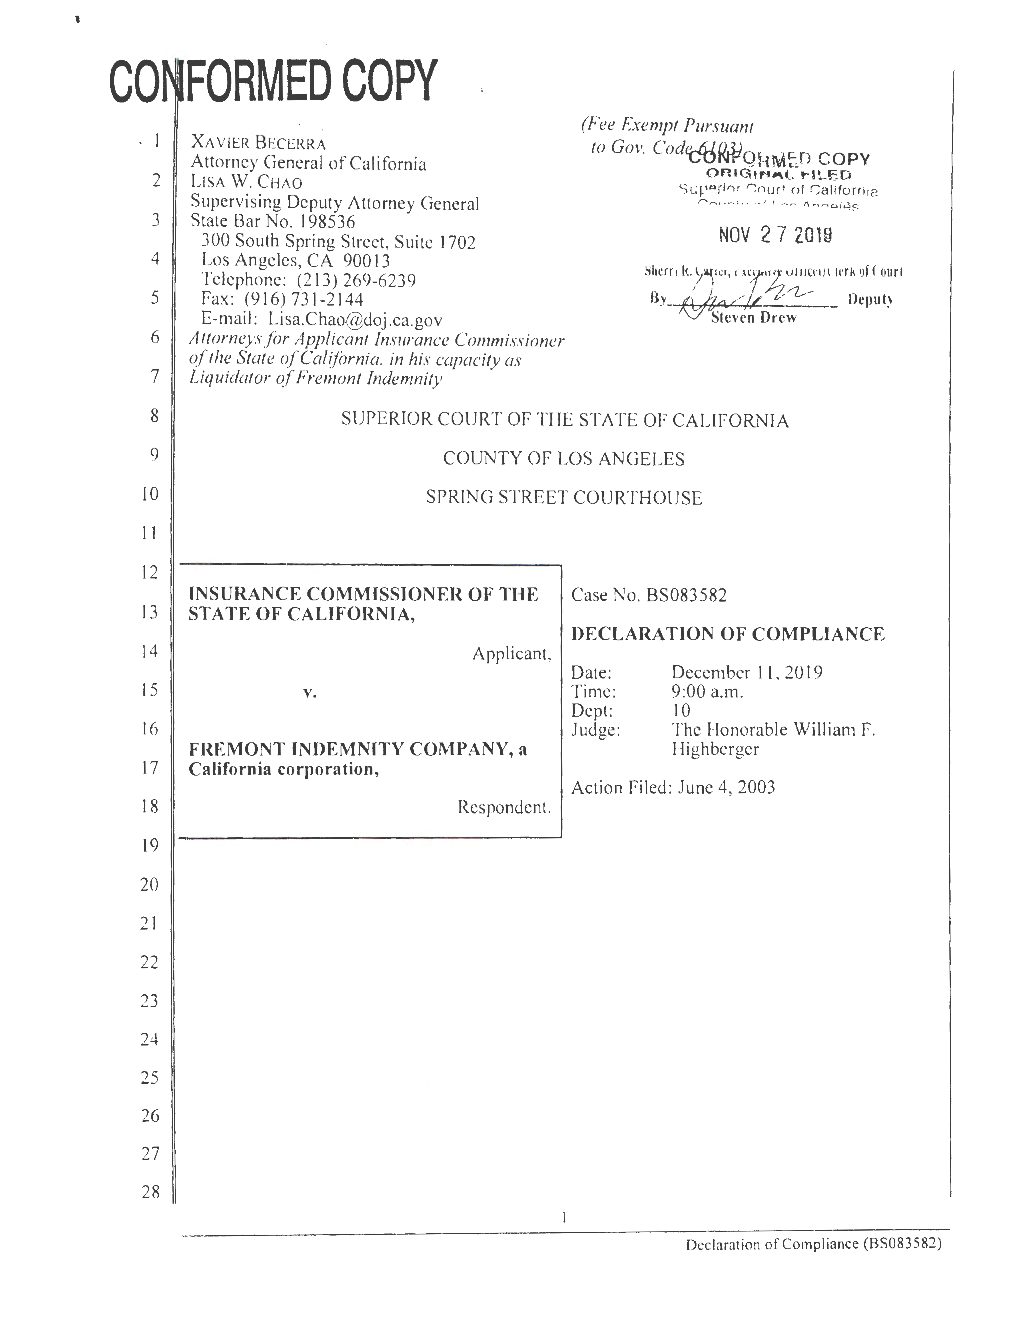 FREMONT INDEMNITY COMPANY, a Highberger 17 California Corporation, Action Filed: June 4, 2003 18 Respondent